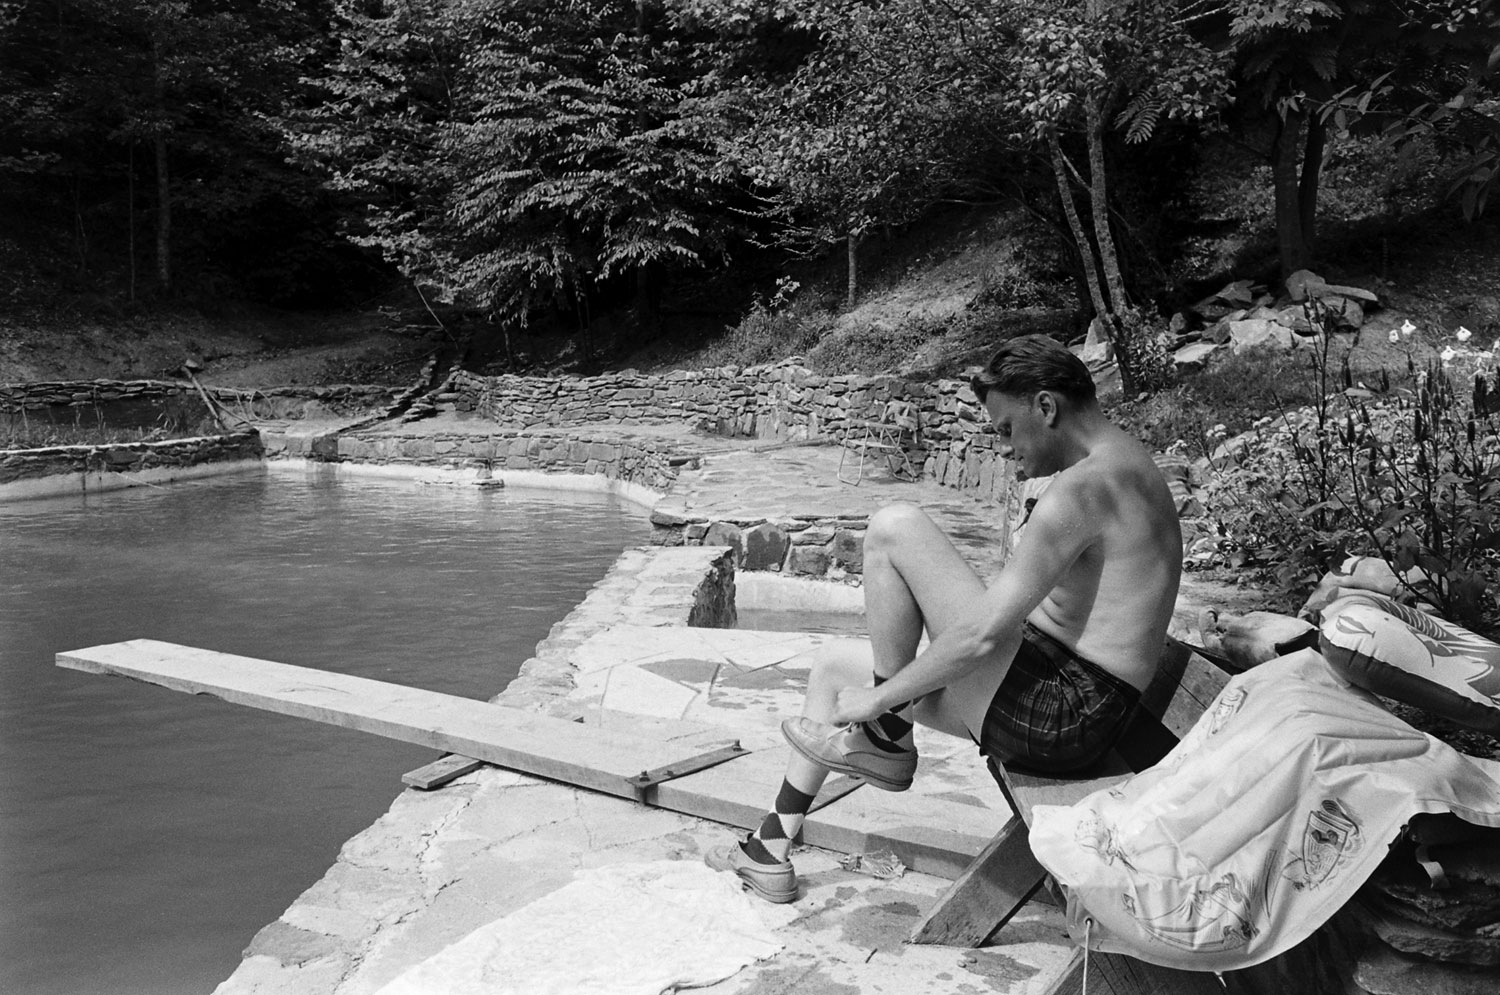 The Rev. Billy Graham beside his swimming pool, 1955.